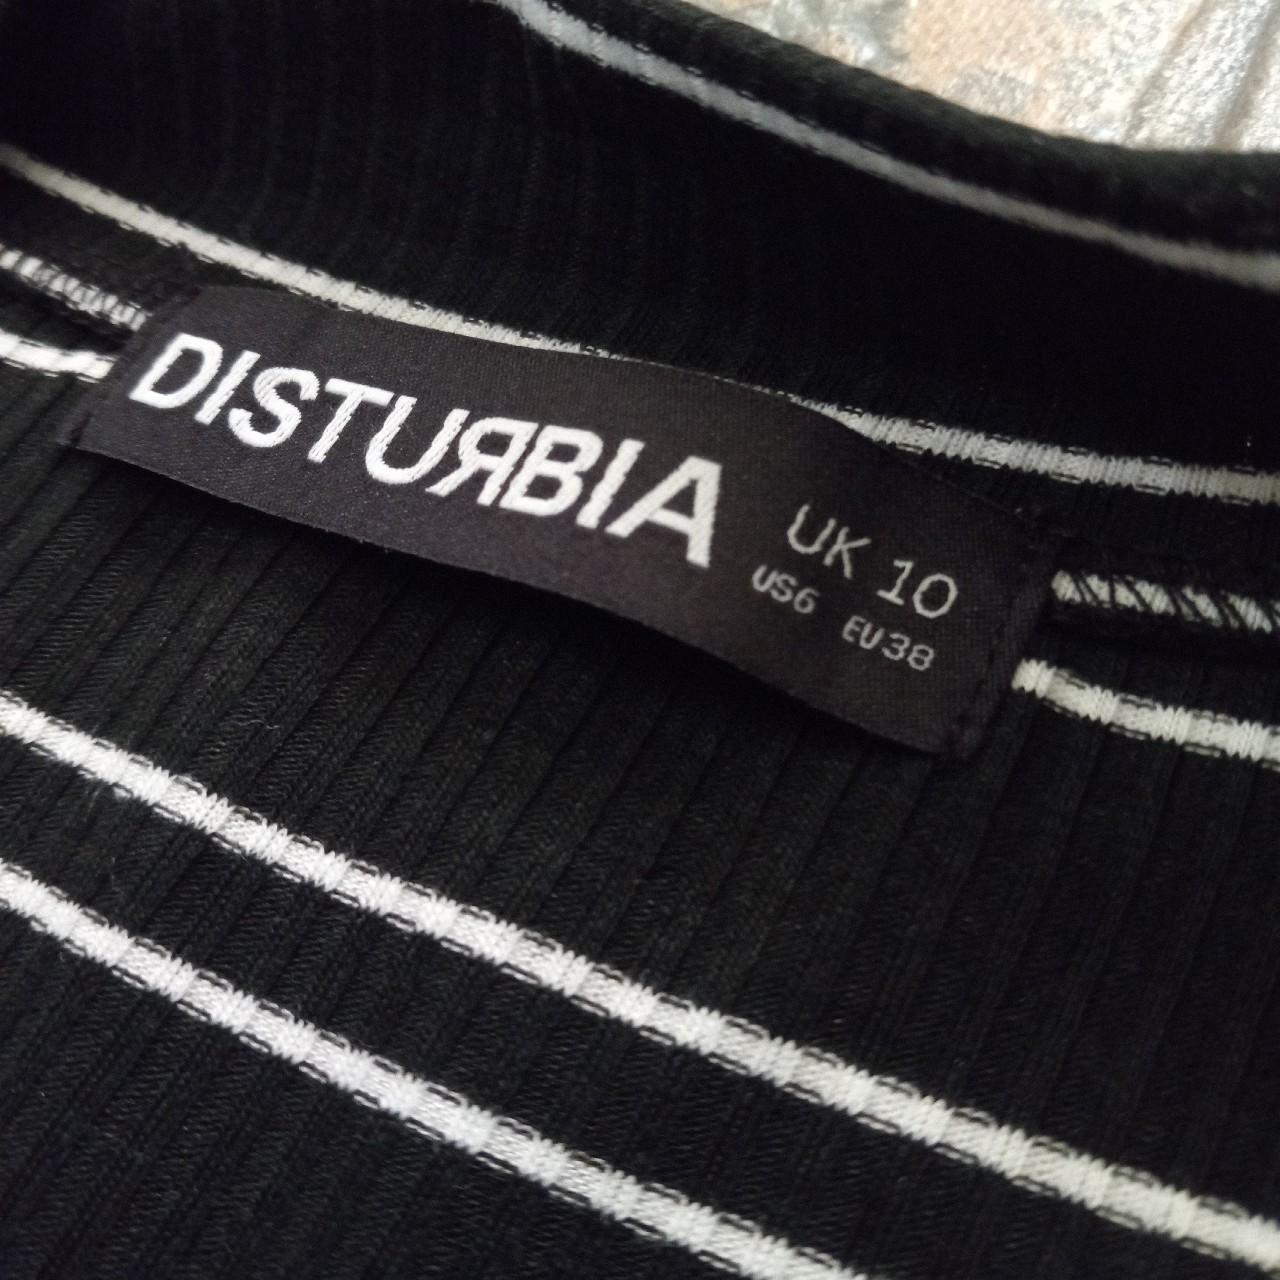 Product Image 3 - Sold in a bundle deal.

Disturbia